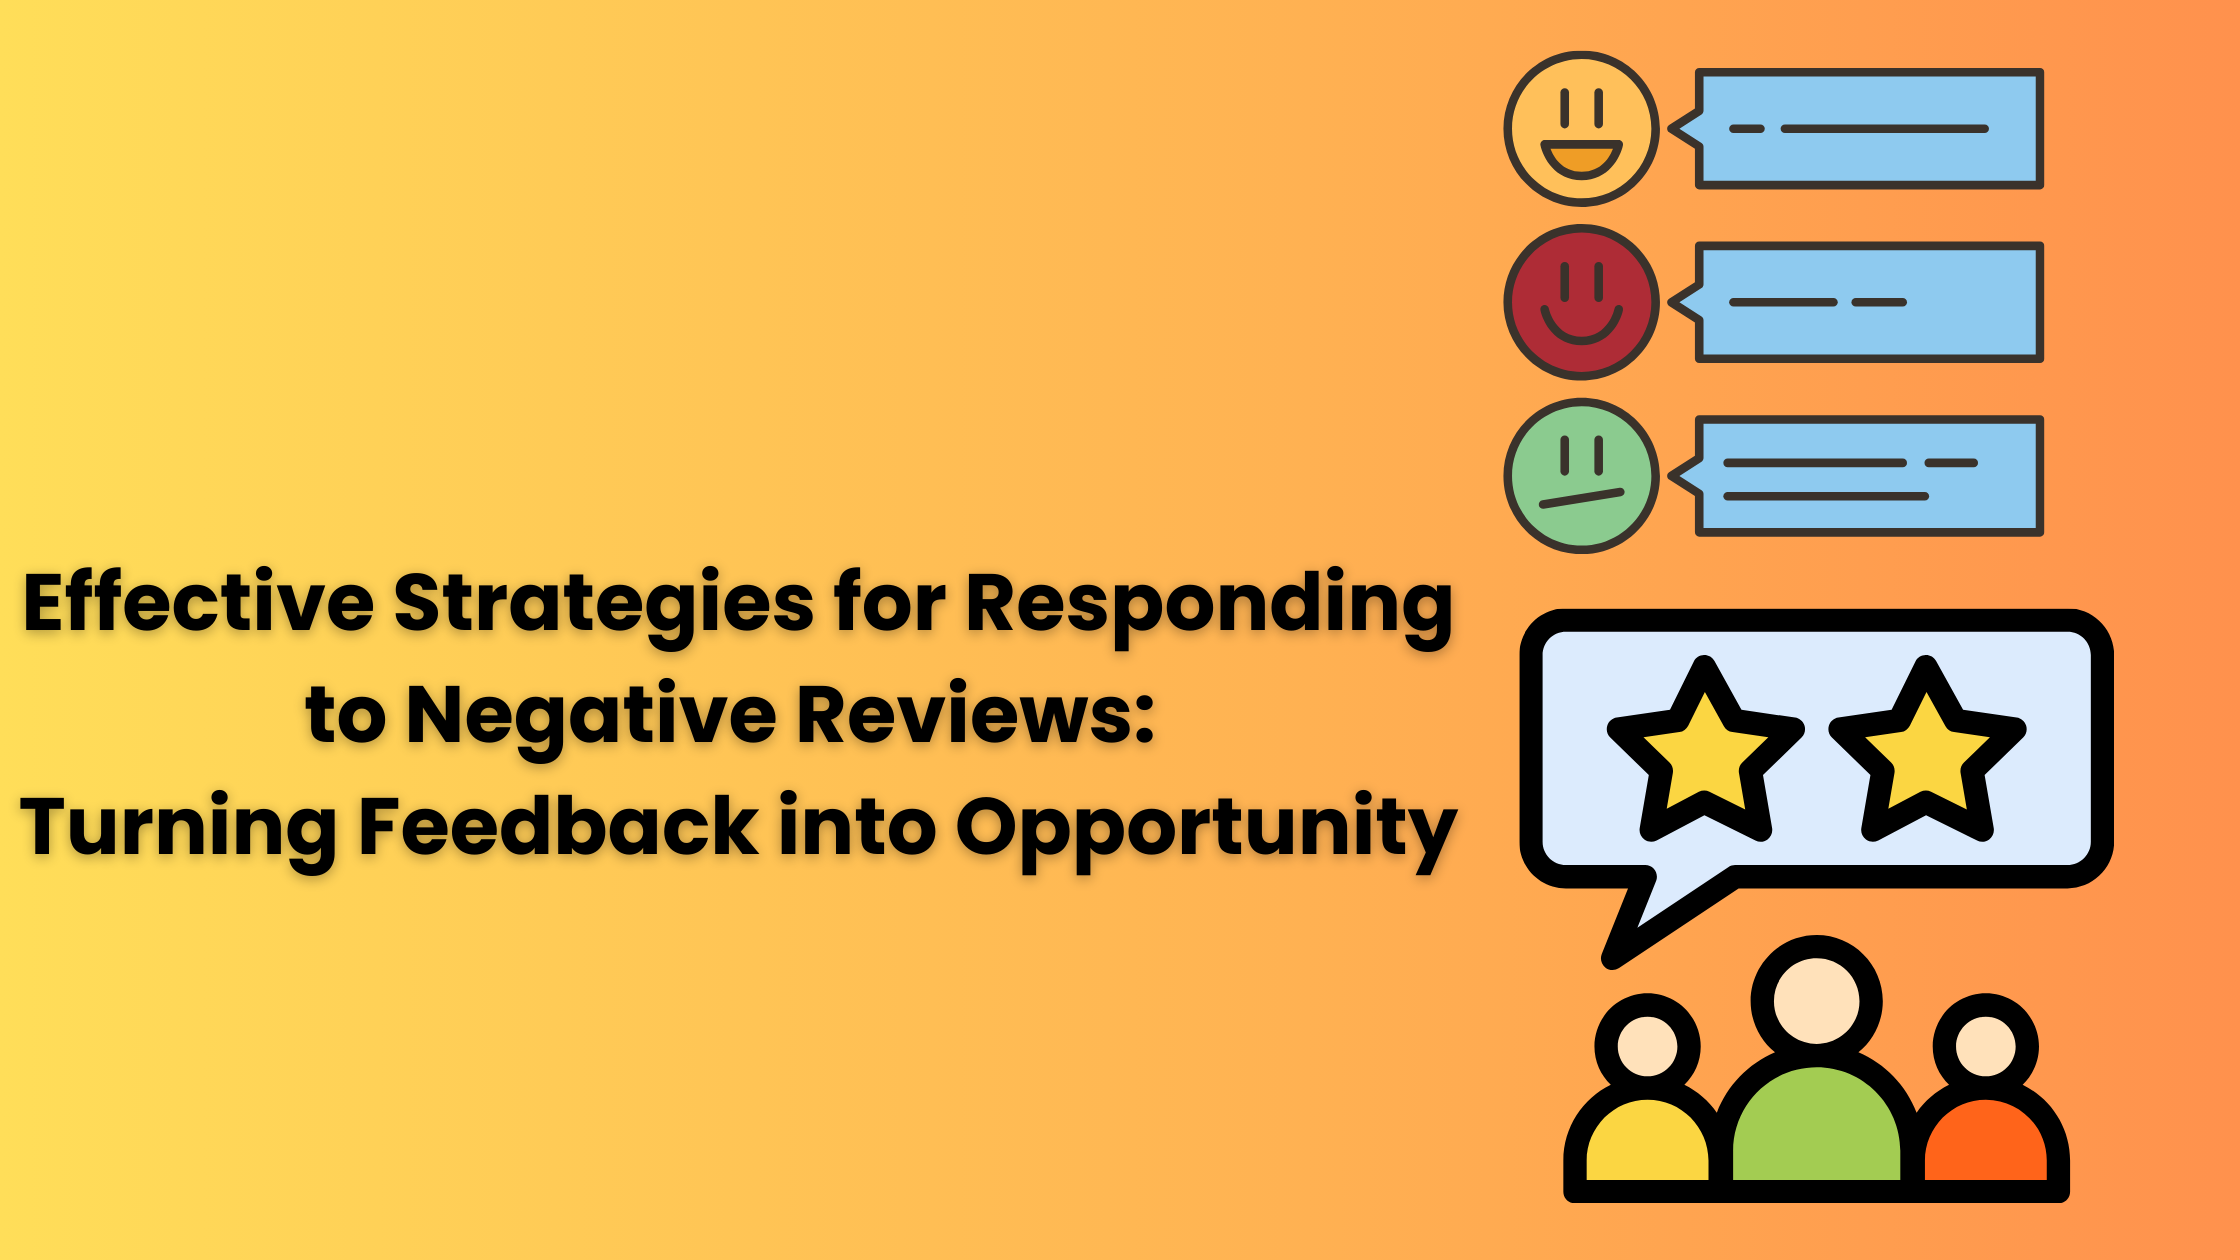 Effective Strategies for Responding to Negative Reviews: Turning Feedback into Opportunity